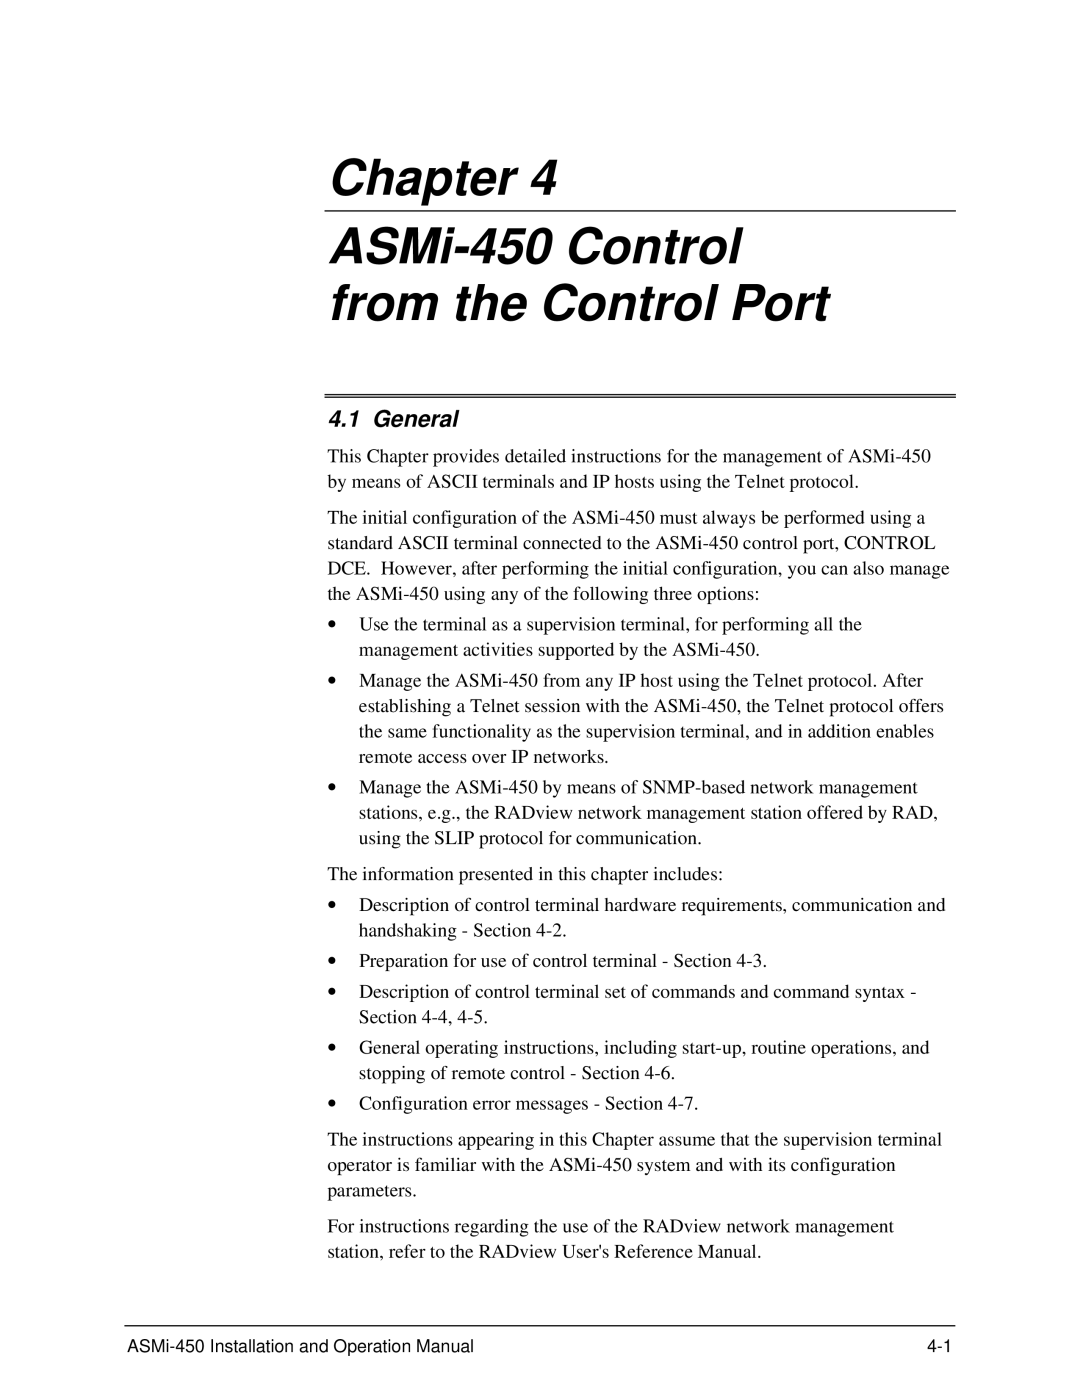 RAD Data comm ASMI-450 operation manual Chapter ASMi-450 Control from the Control Port, General 